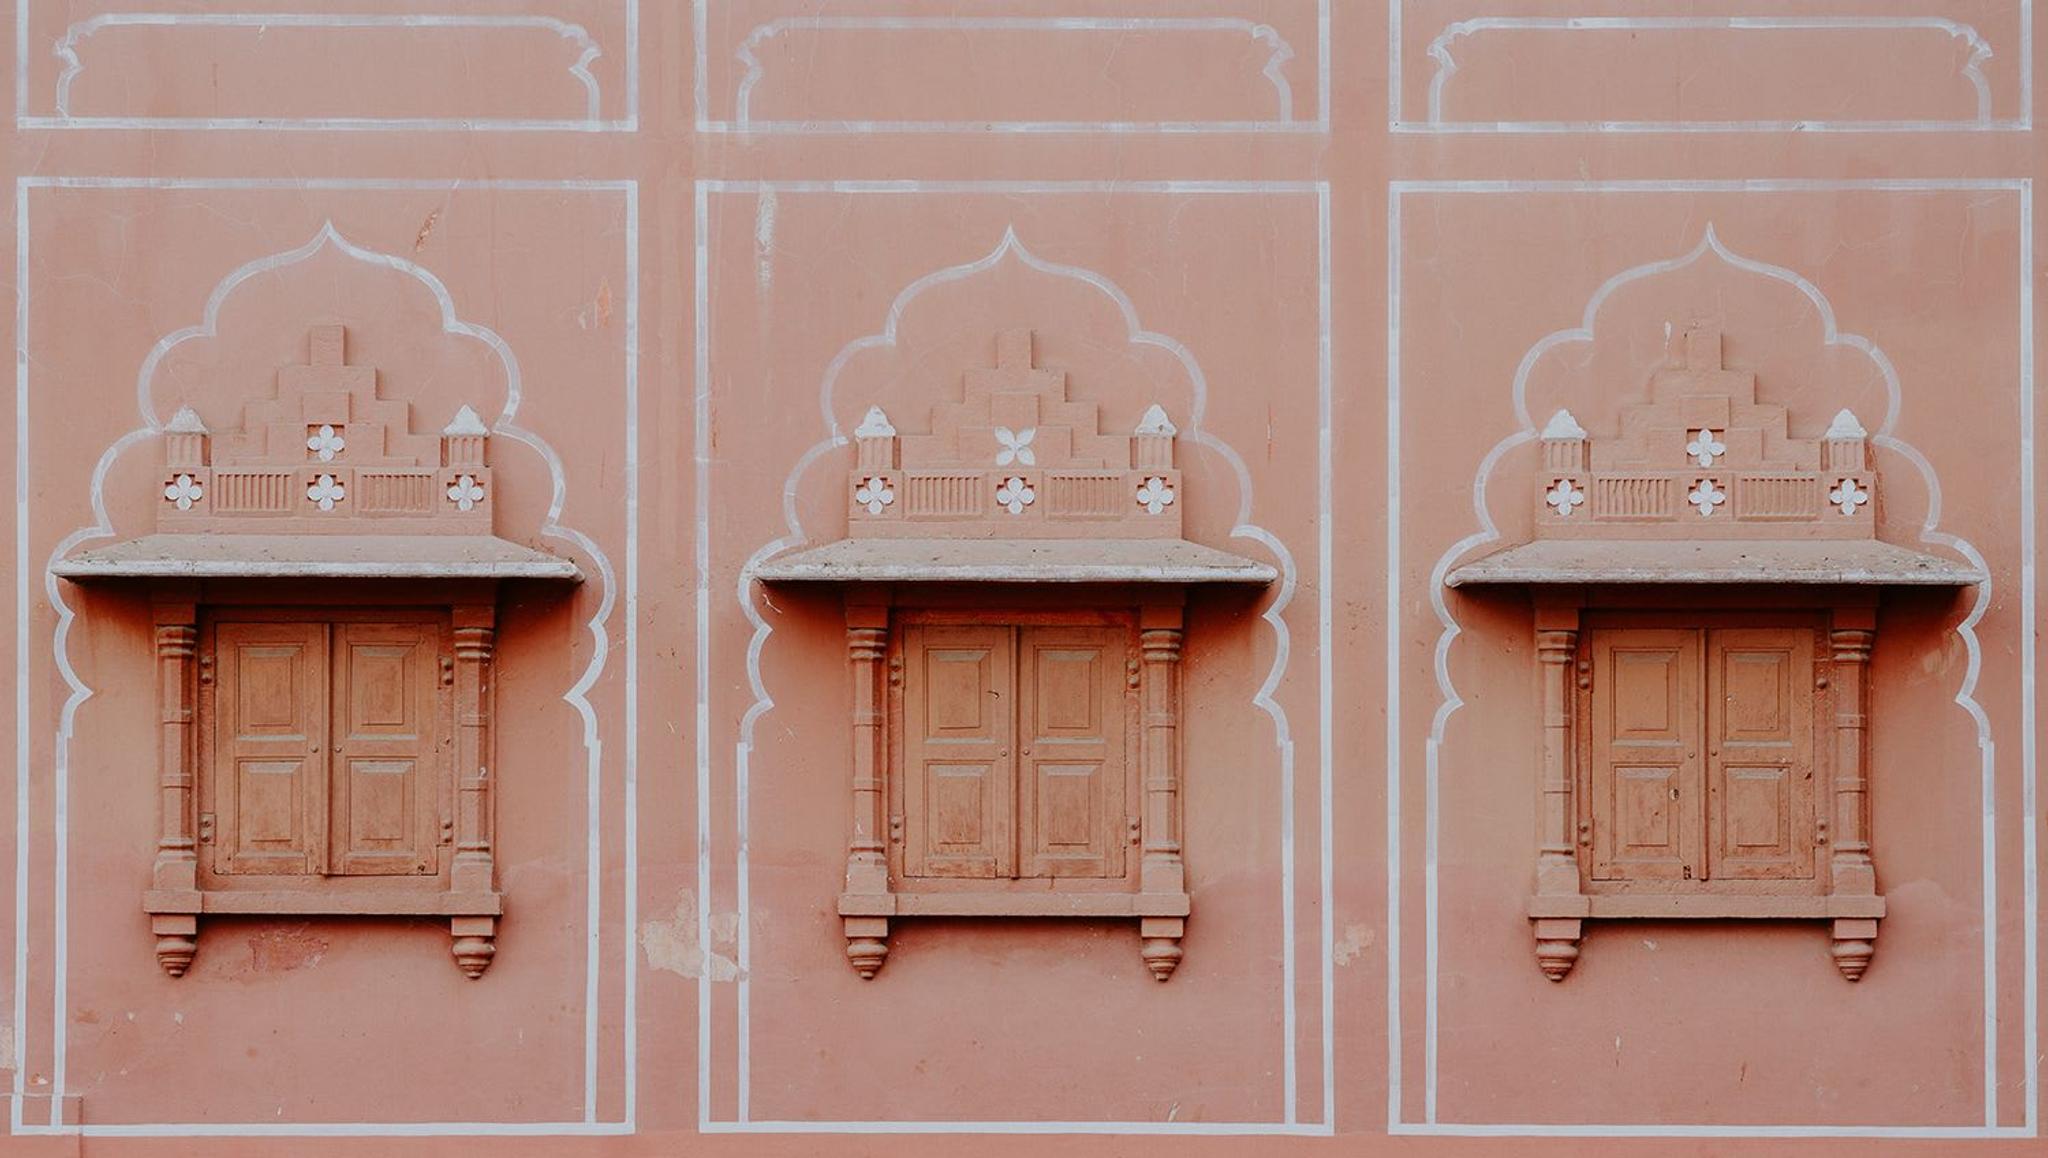 The Cinematic Series: Ispirata a Wes Anderson